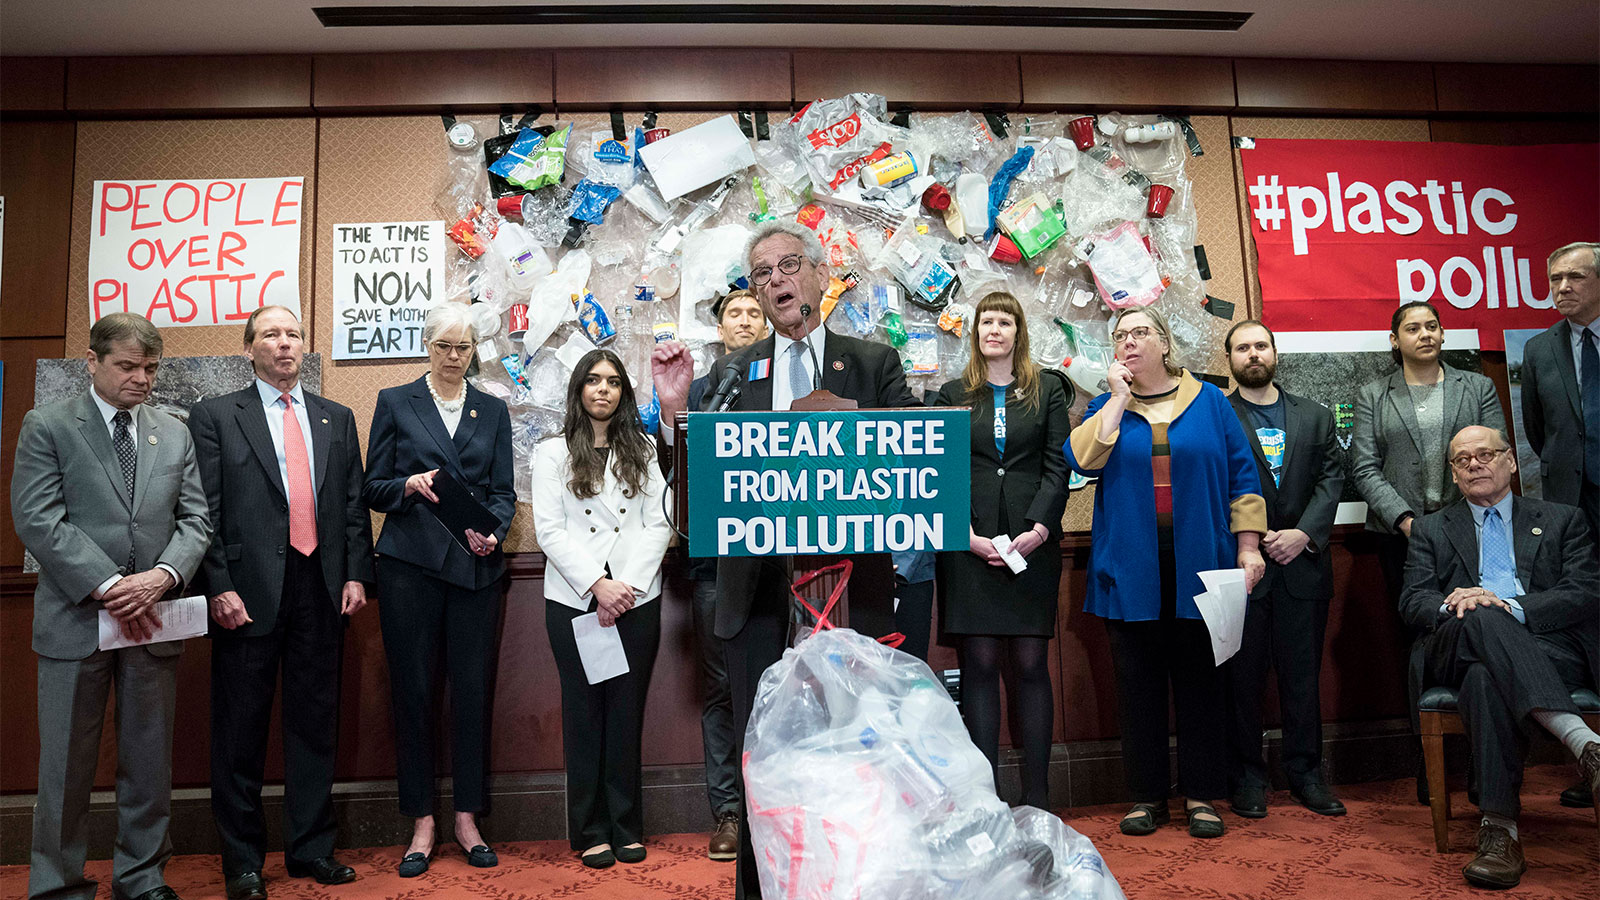 Rep. Alan Lowenthal speaking at a podium with a sign reading "break free from plastic pollution"; a group of people stands behind him in front of a wall with plastic trash attached to it